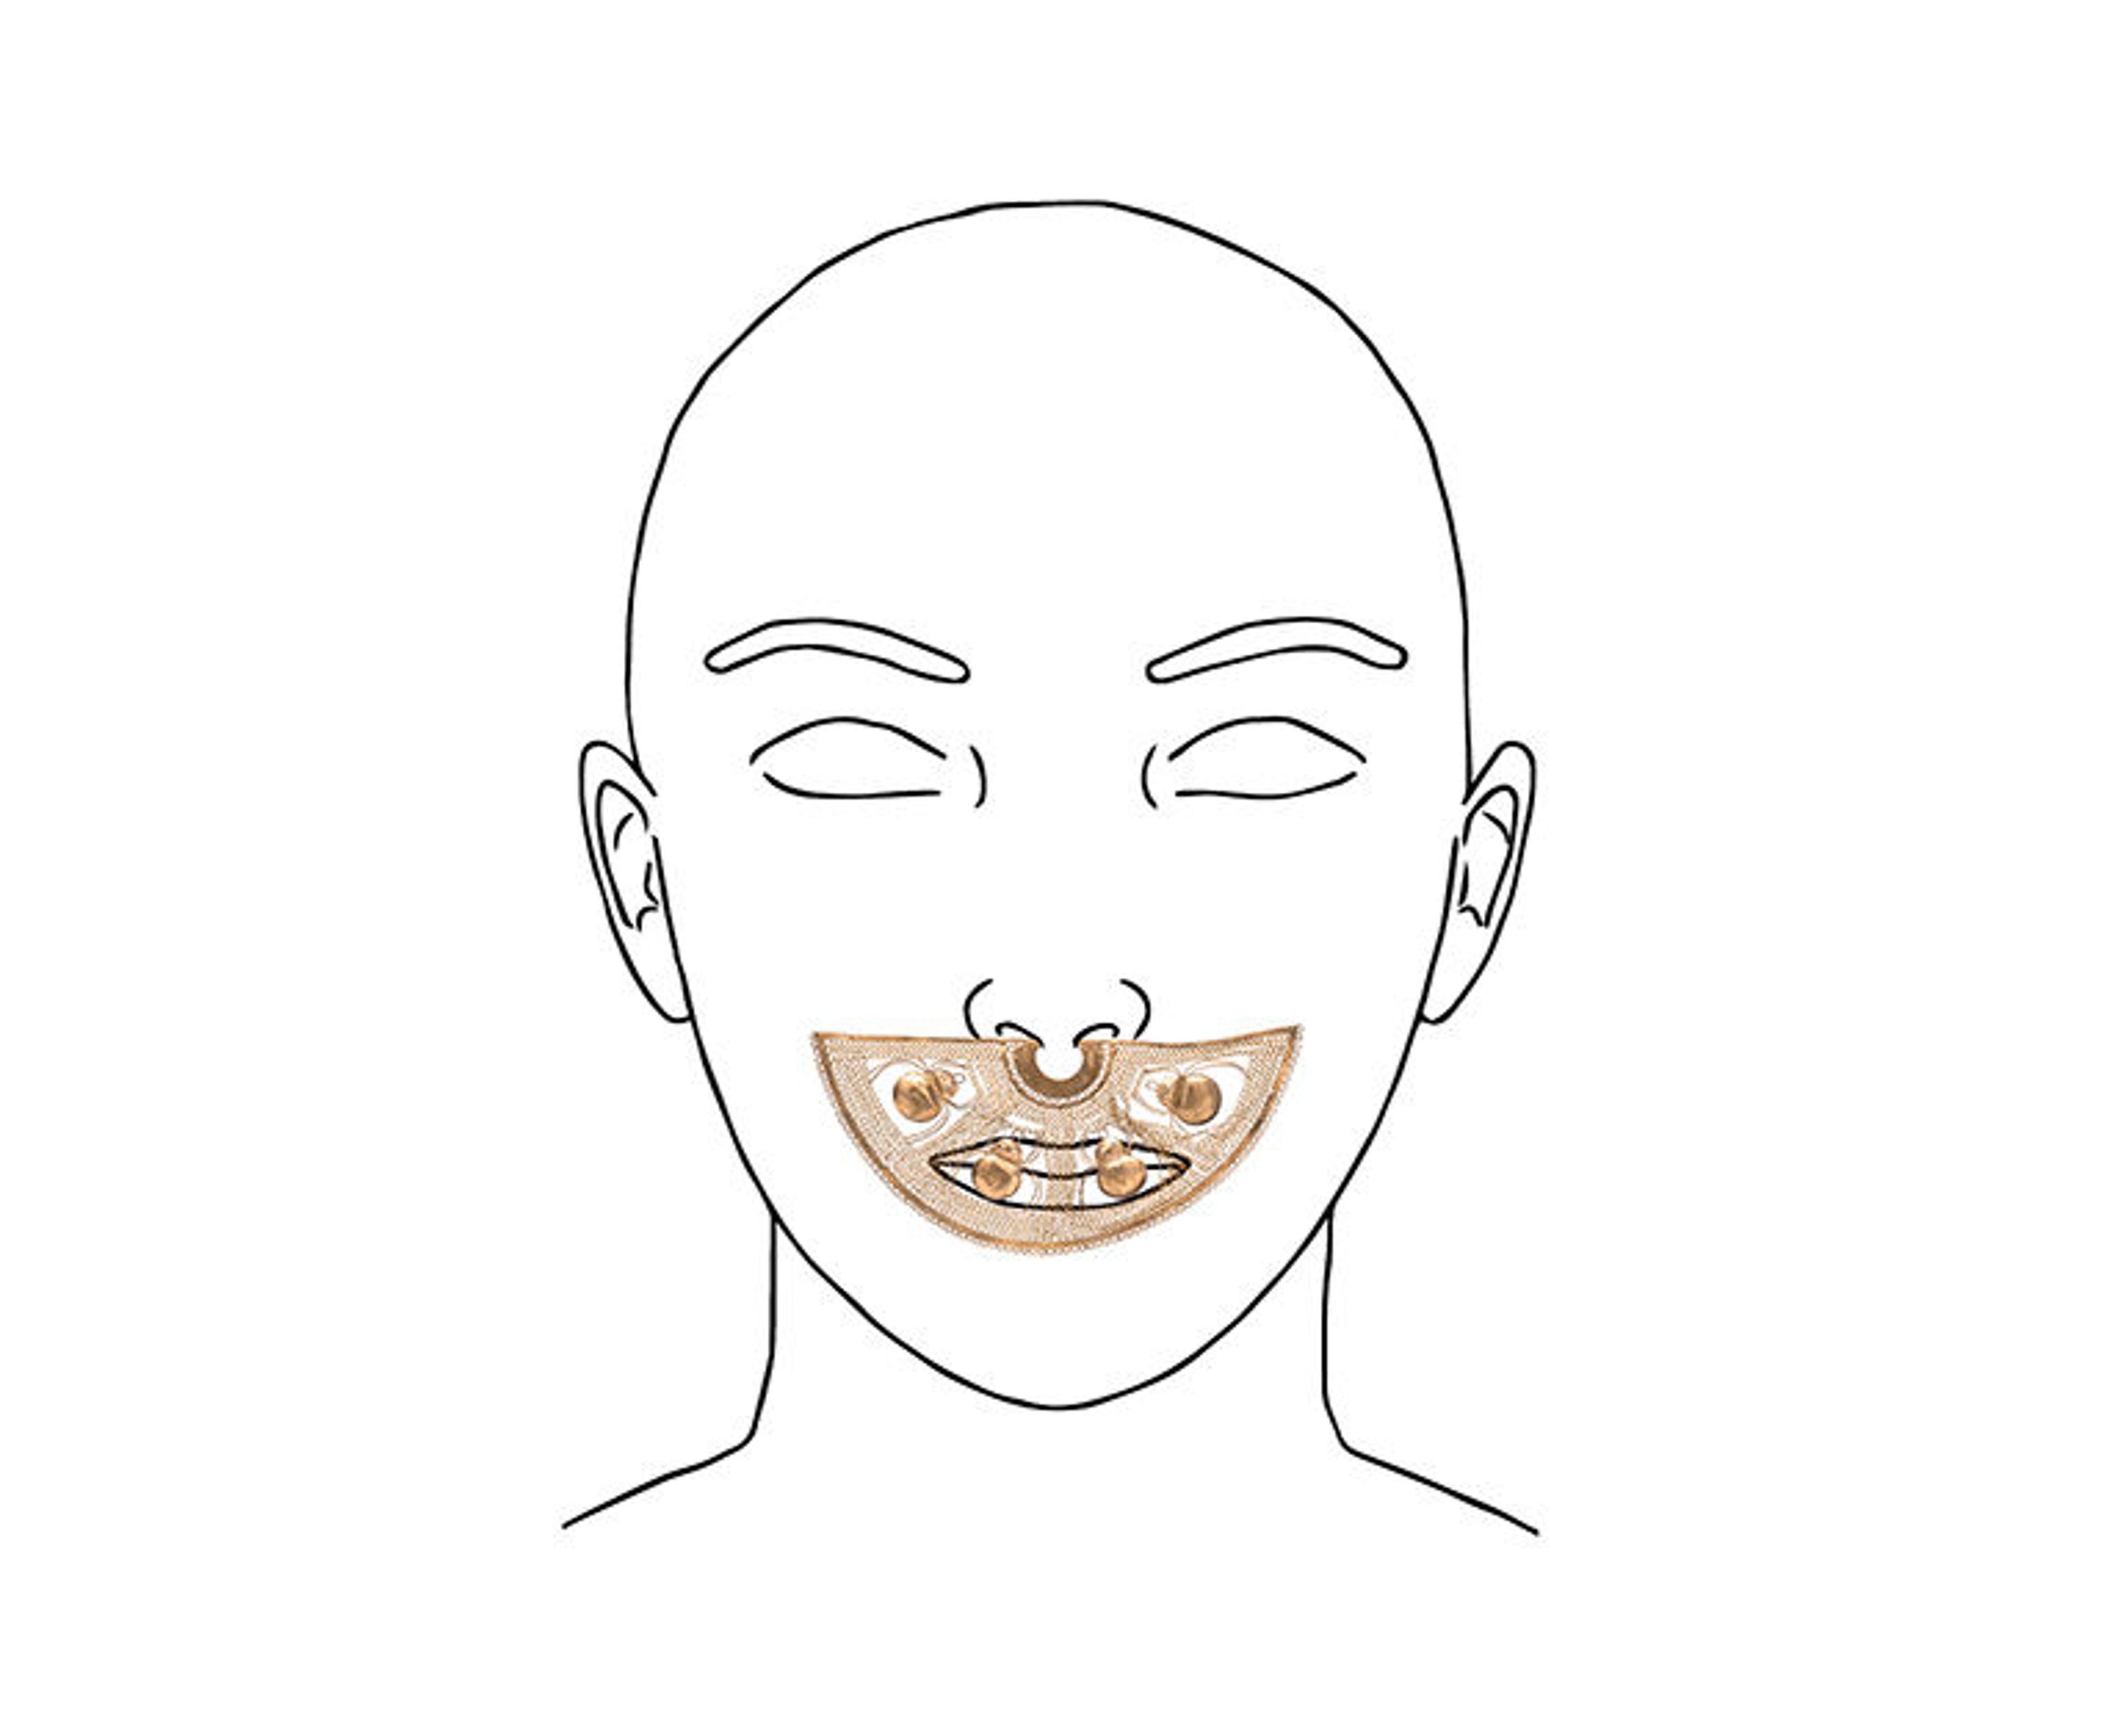 The nose ornament shown on line drawn outline of a face. 